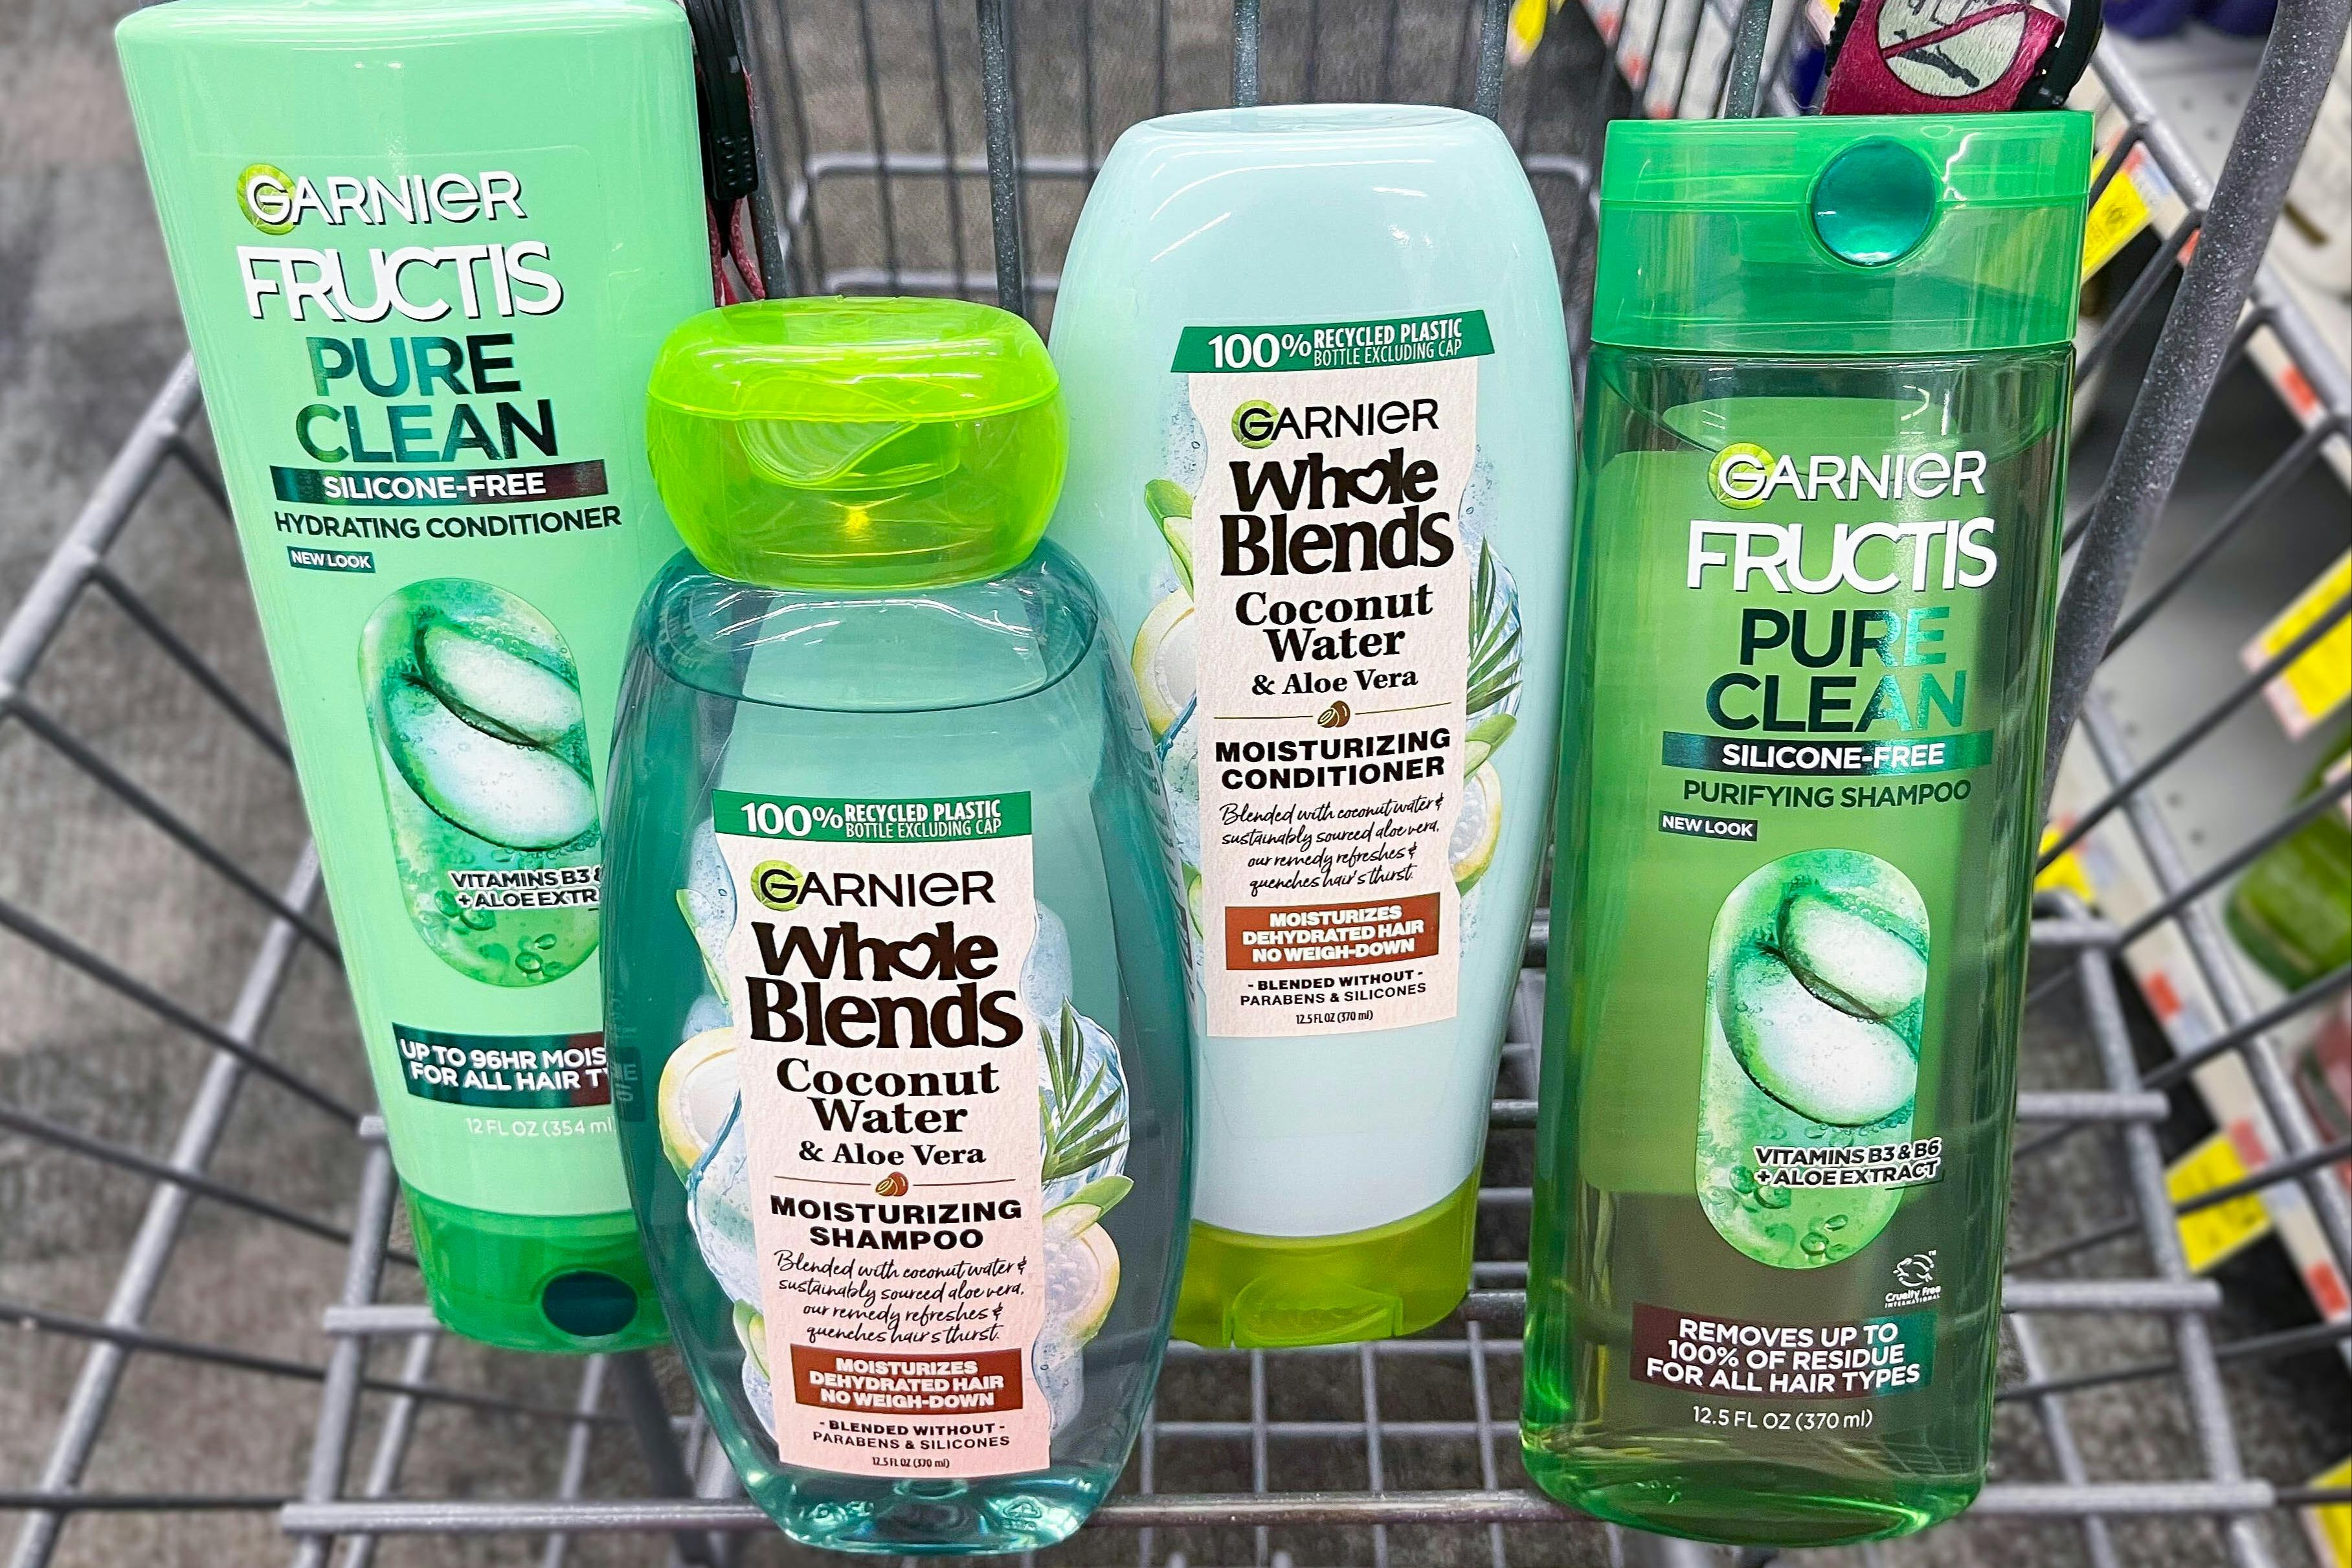 Garnier Hair Care, as Low as $1.59 Each at CVS - The Krazy Coupon Lady